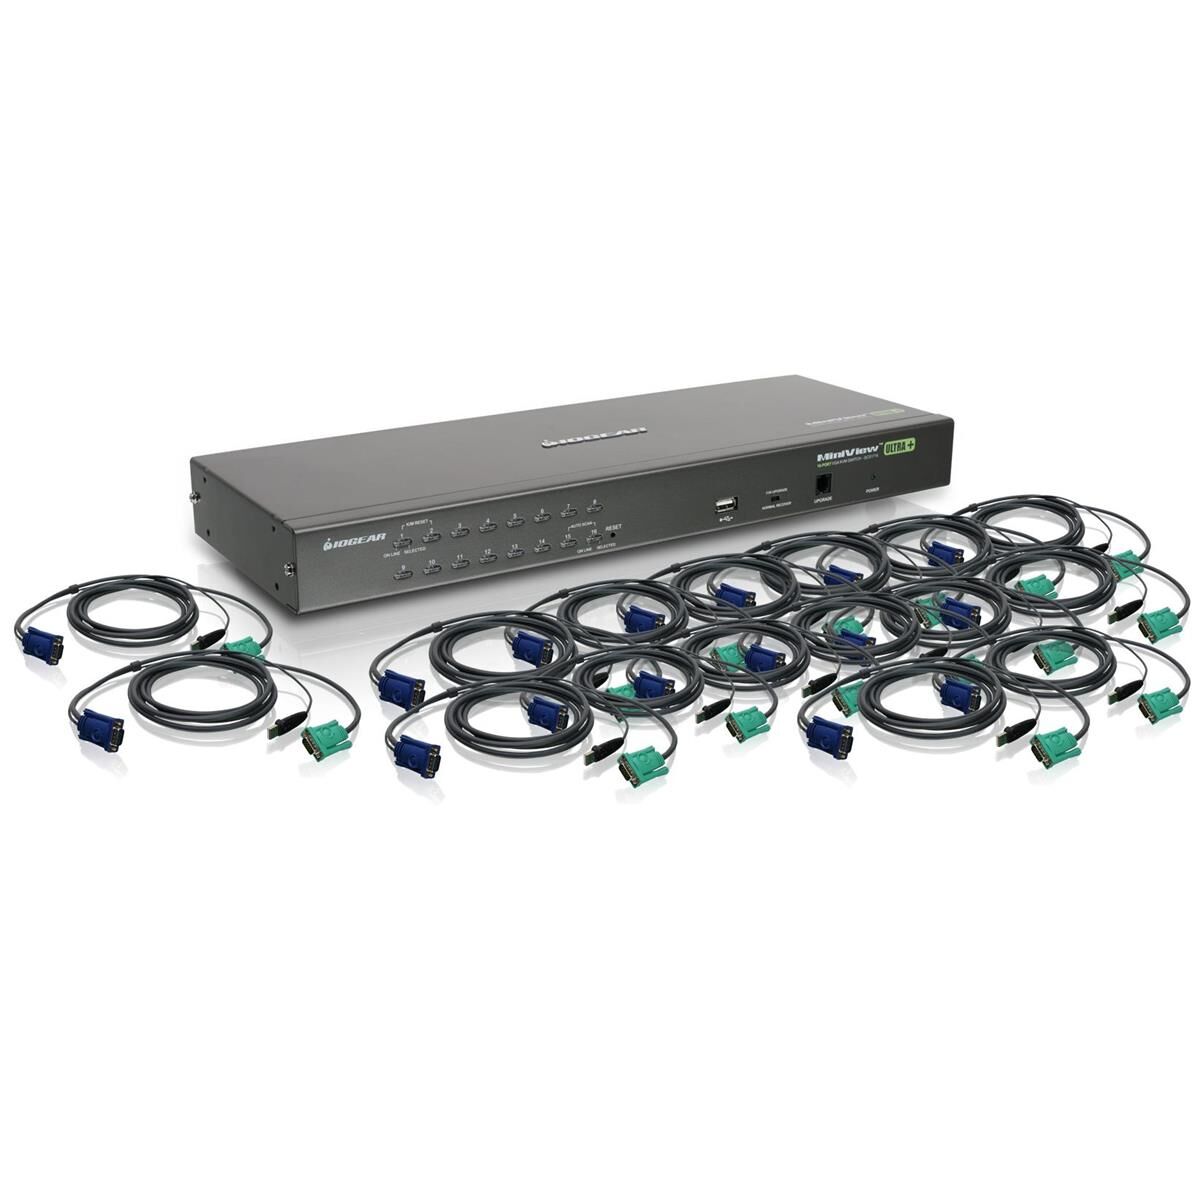 IOGear GCS1716KITUTAA 16-Port Combo KVM Switch with PS/2 and USB Cables